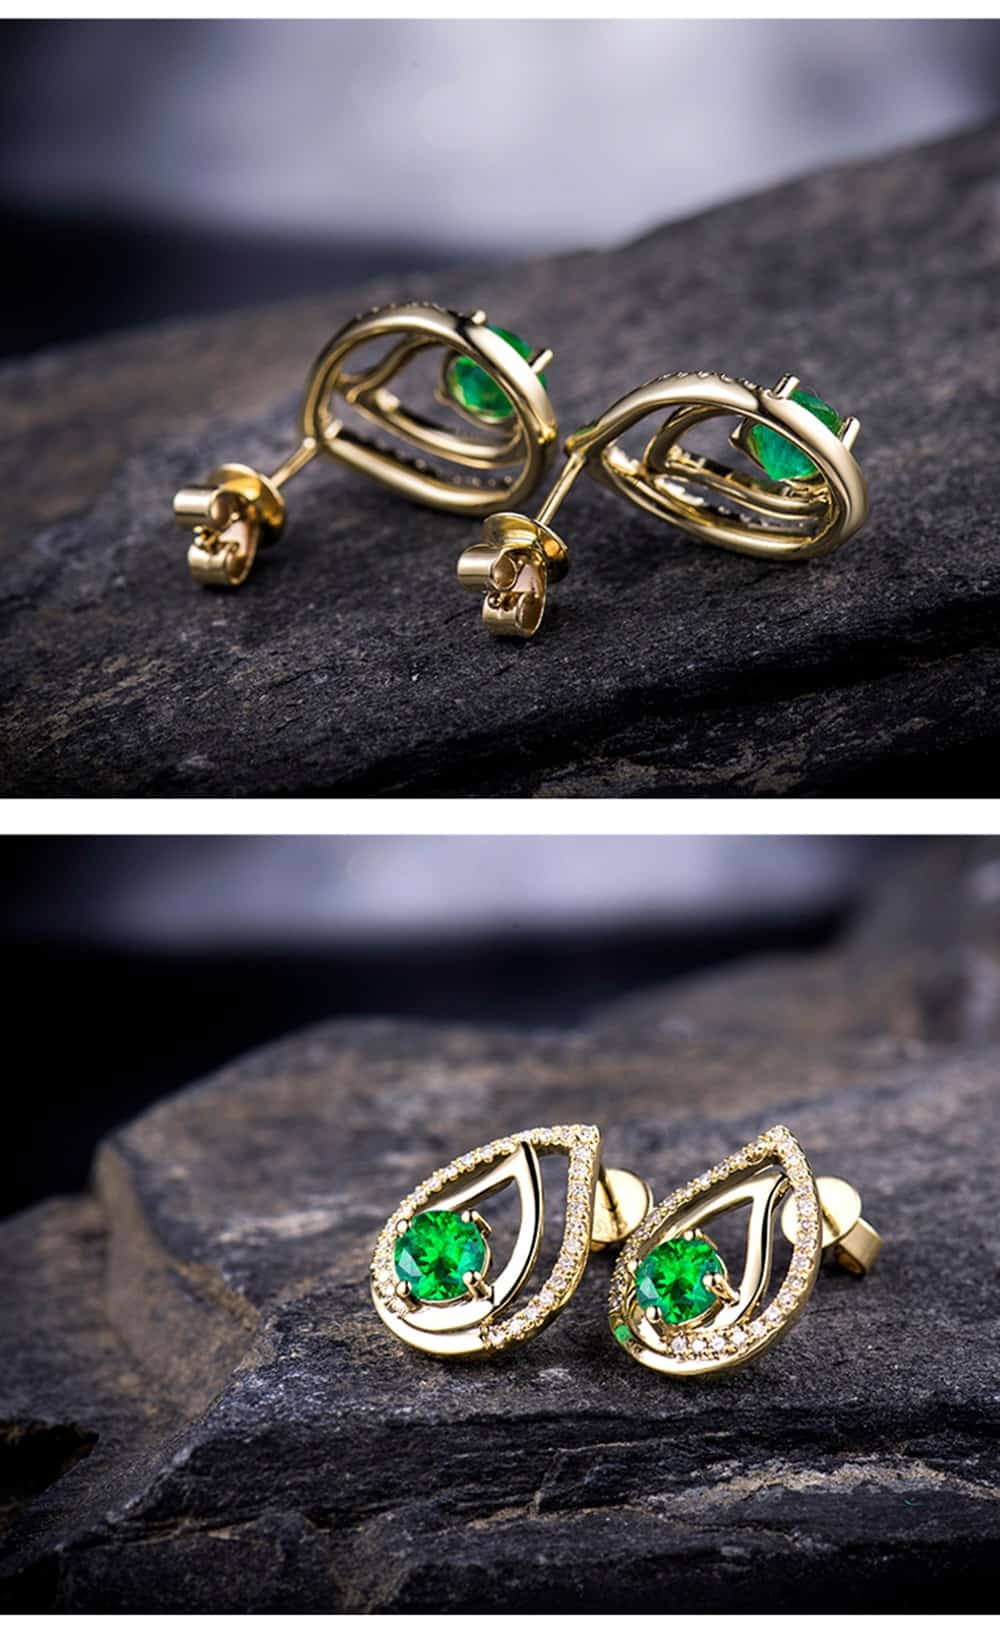 LOVERJEWELRY Lady Stud Earrings Real 18K Yellow Gold Natural Round Tsavorite Classic Earrings For Women Party Office Jewelry